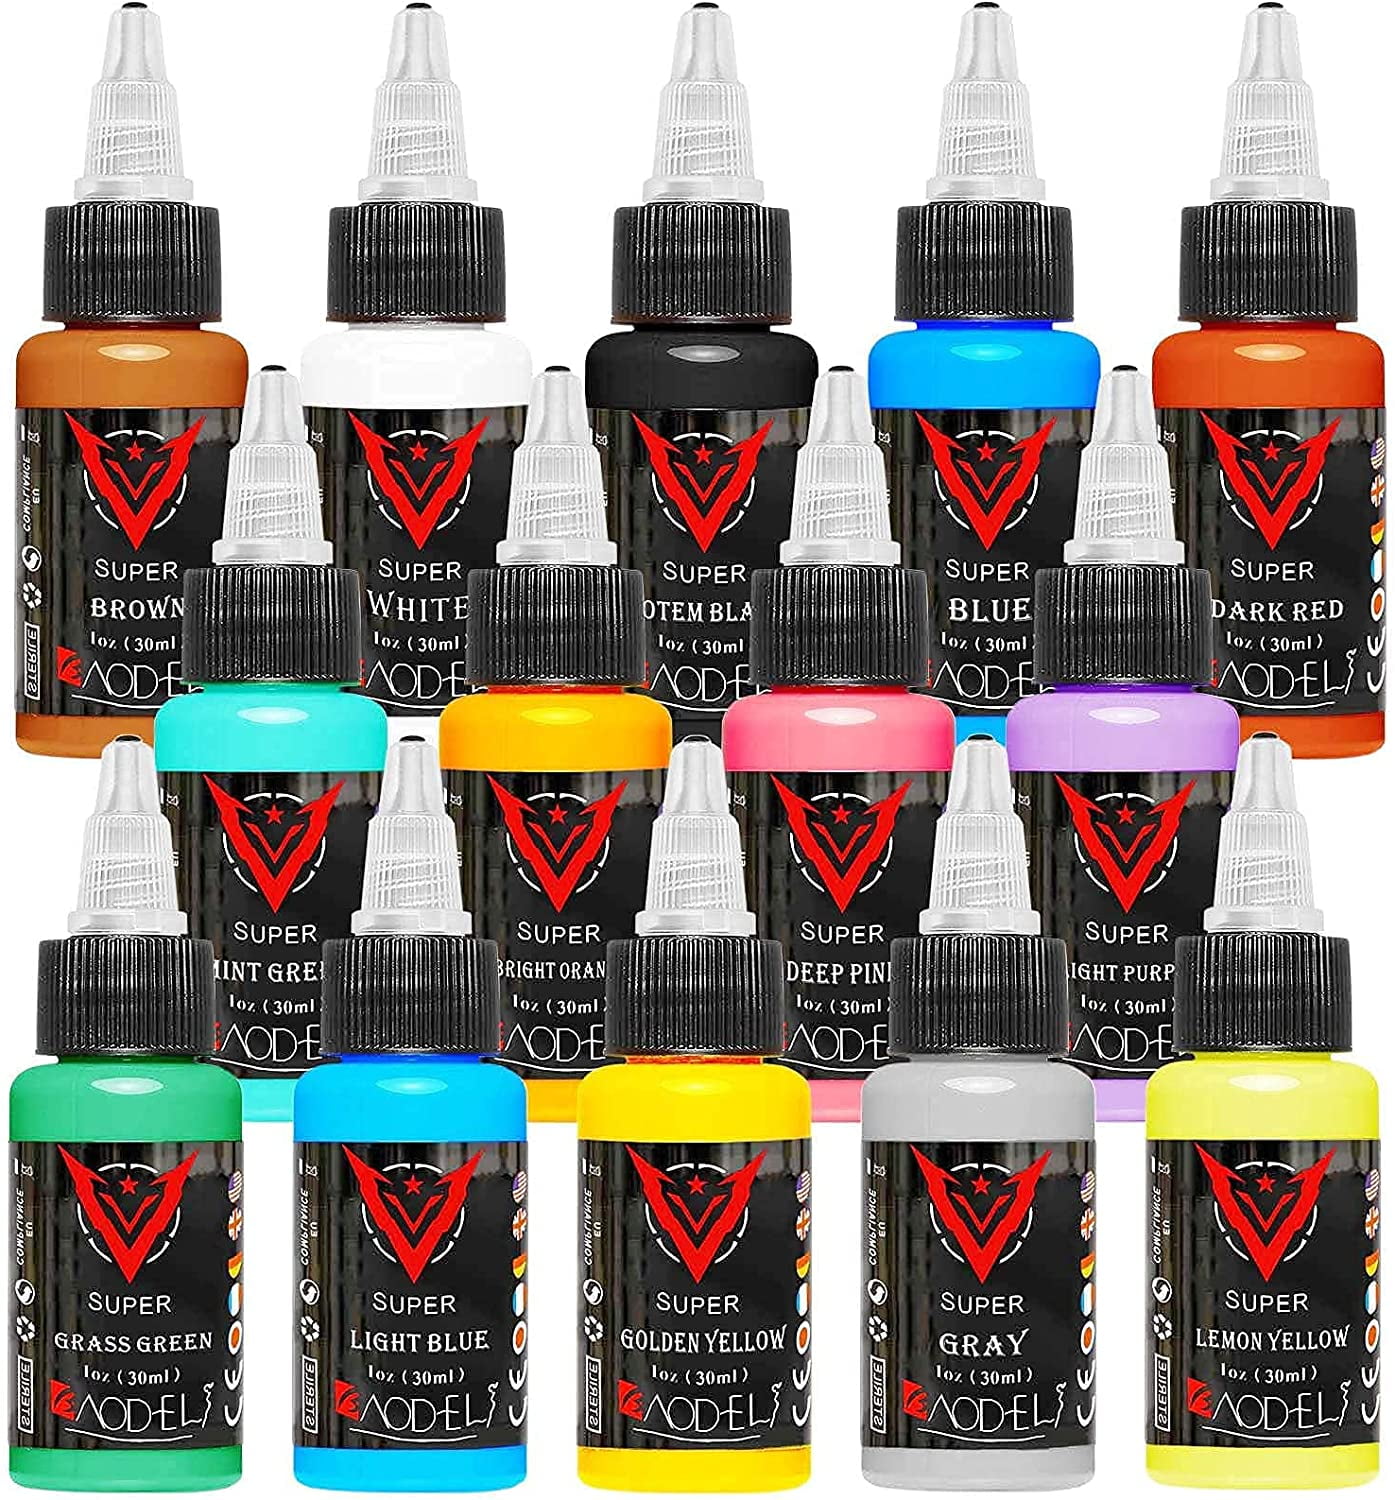 World Famous Tattoo Ink - 7 Color Simple Tattoo Kit - Professional Tattoo  Ink in Color Assortment, Includes White Tattoo Ink - Skin-Safe Permanent  Tattooing - Vegan & Non-Toxic (0.5 oz Each)